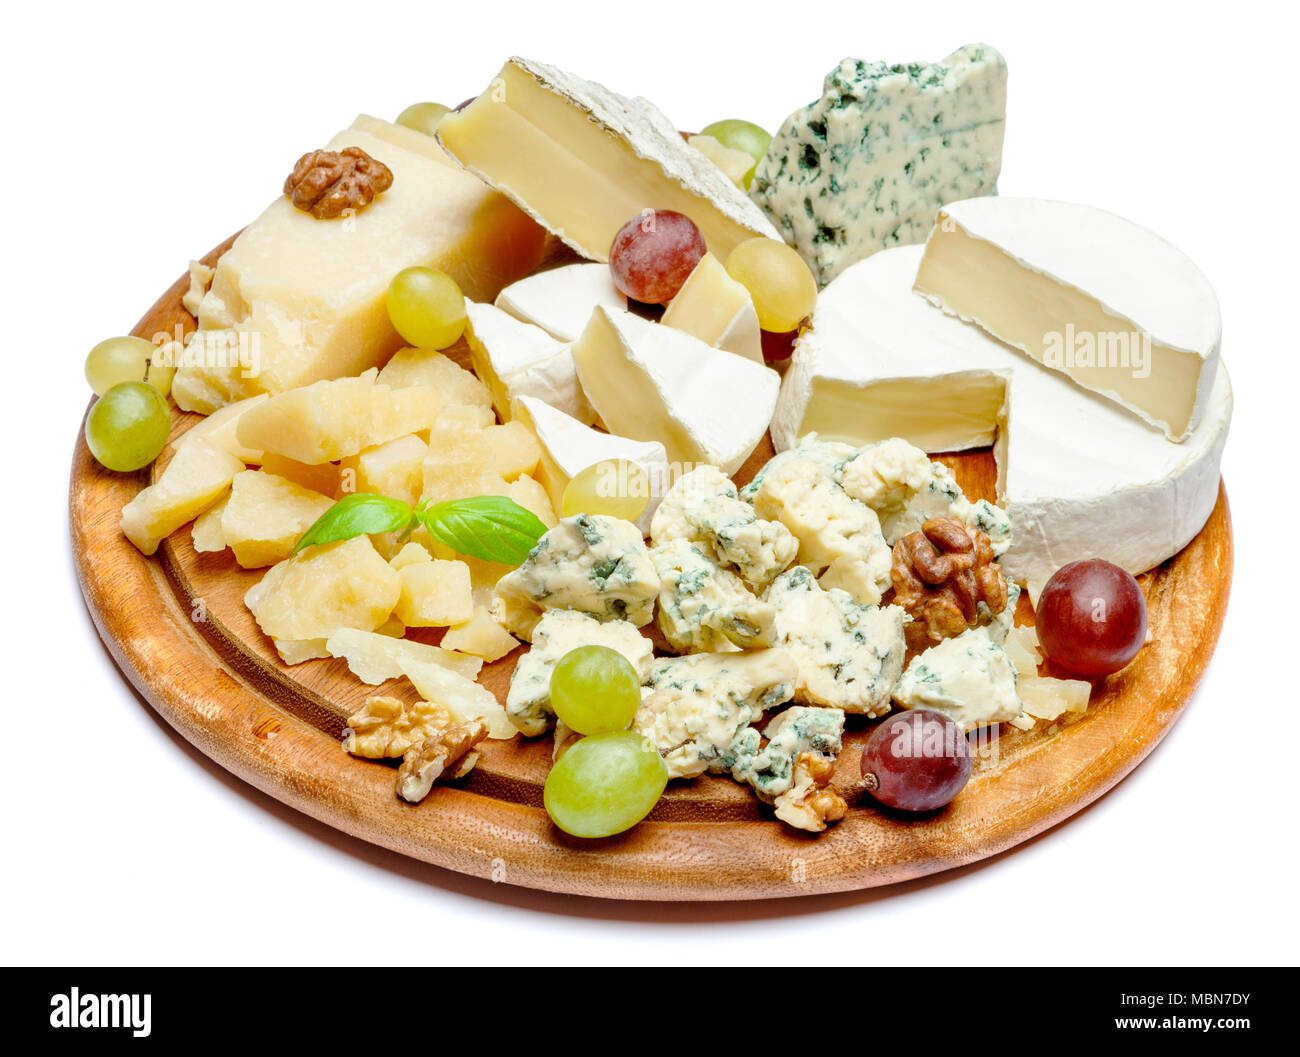 Cheese plate with Assorted cheeses Camembert, Brie, Parmesan blue cheese, goat Stock Photo